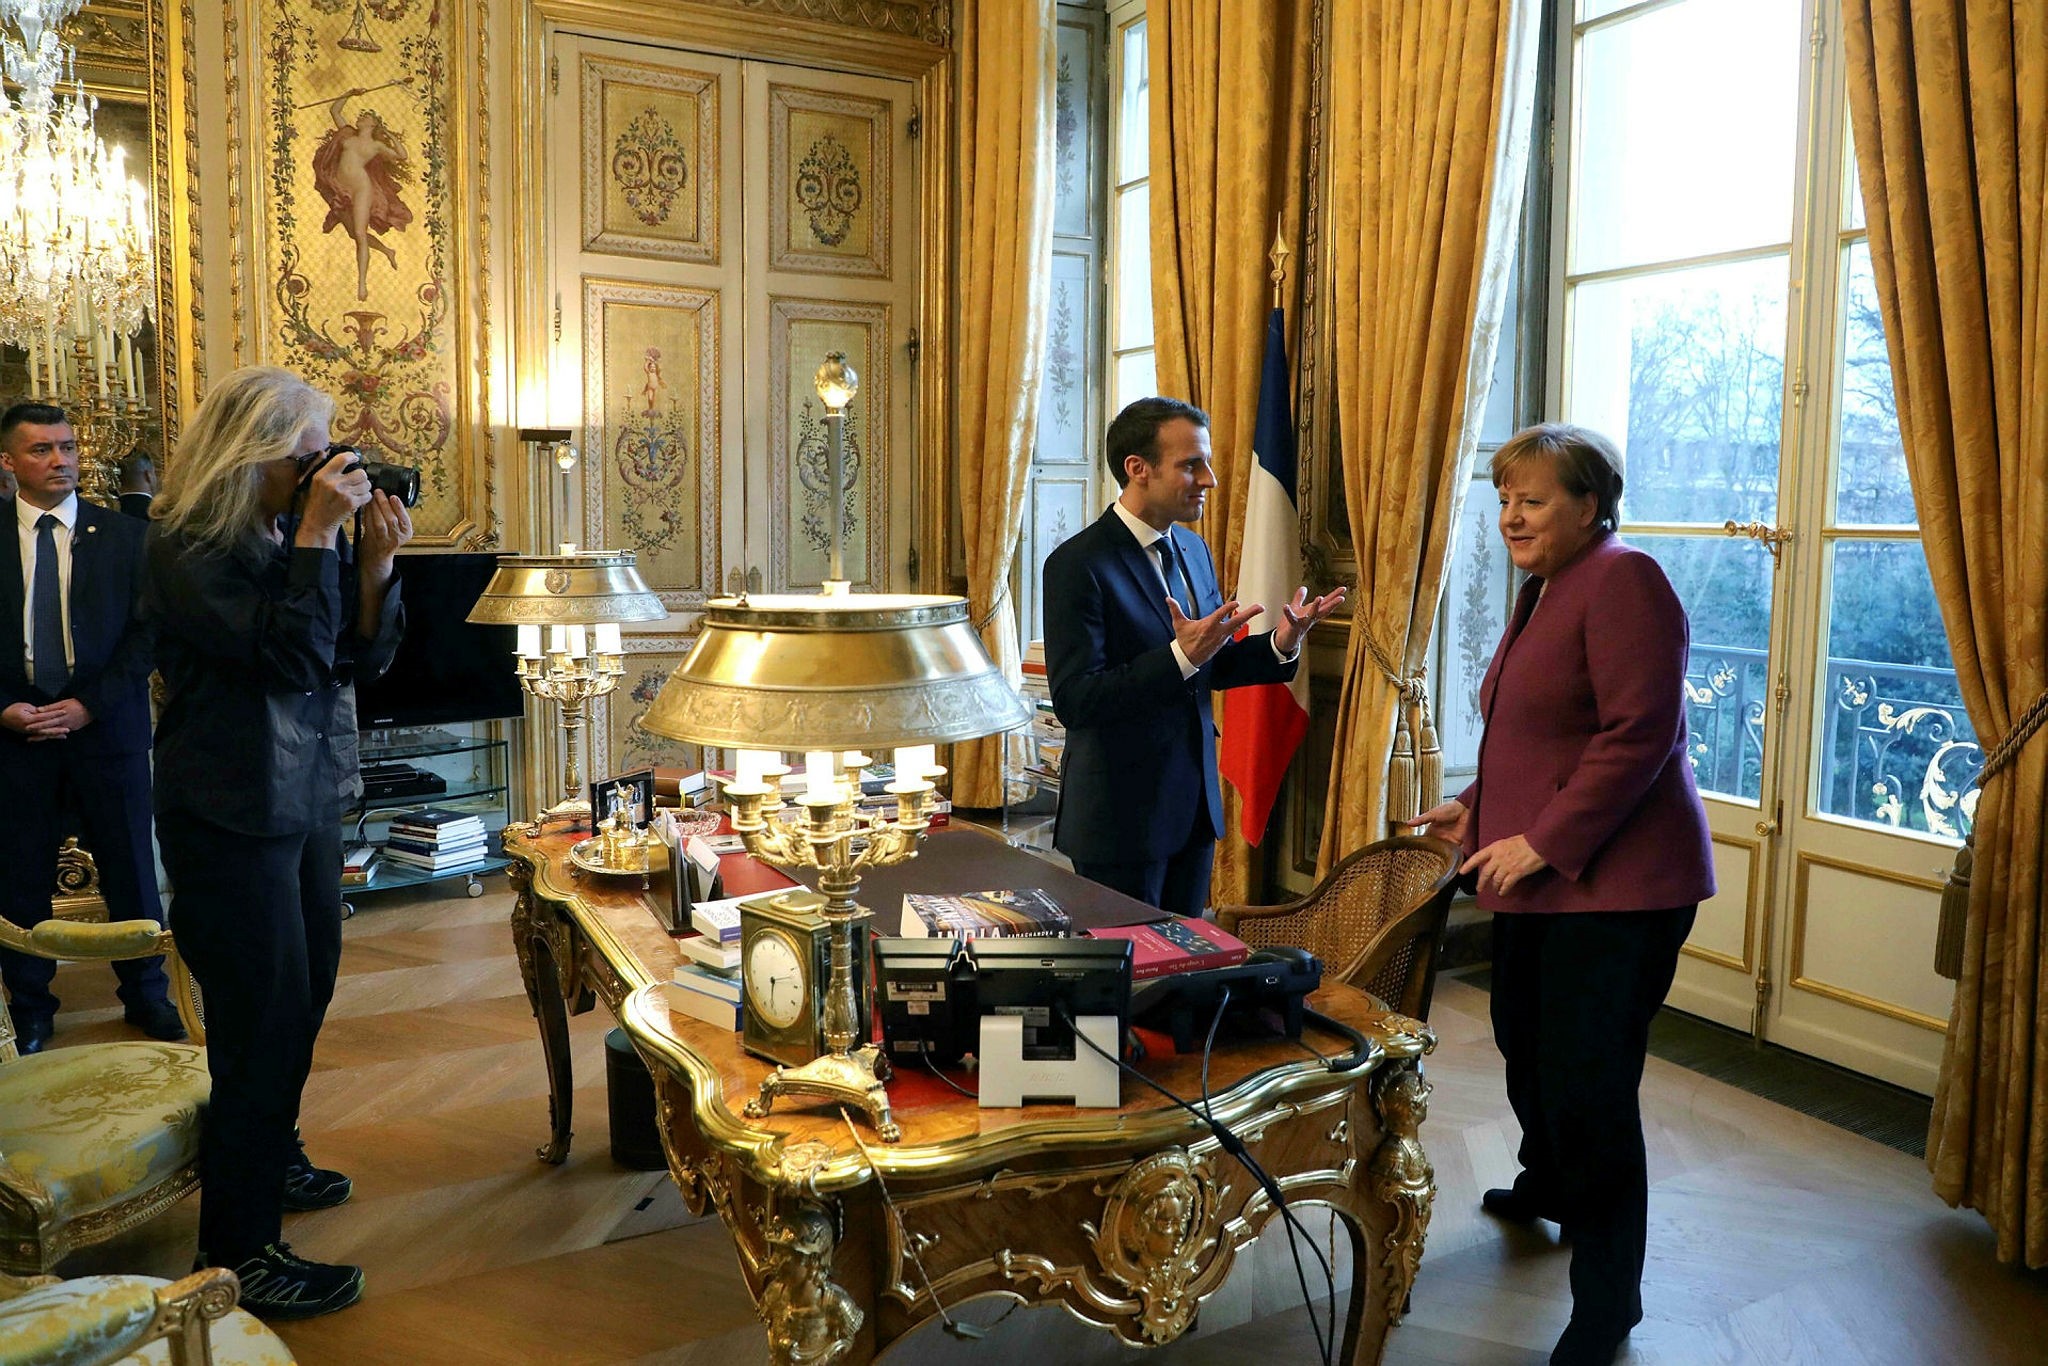 American photographer Annie Leibovitz (L) takes pictures of French President Emmanuel Macron (L) and German Chancellor Angela Merkel meeting at the Eylsee presidential Palace in Paris on March 16, 2018. (AFP Photo)